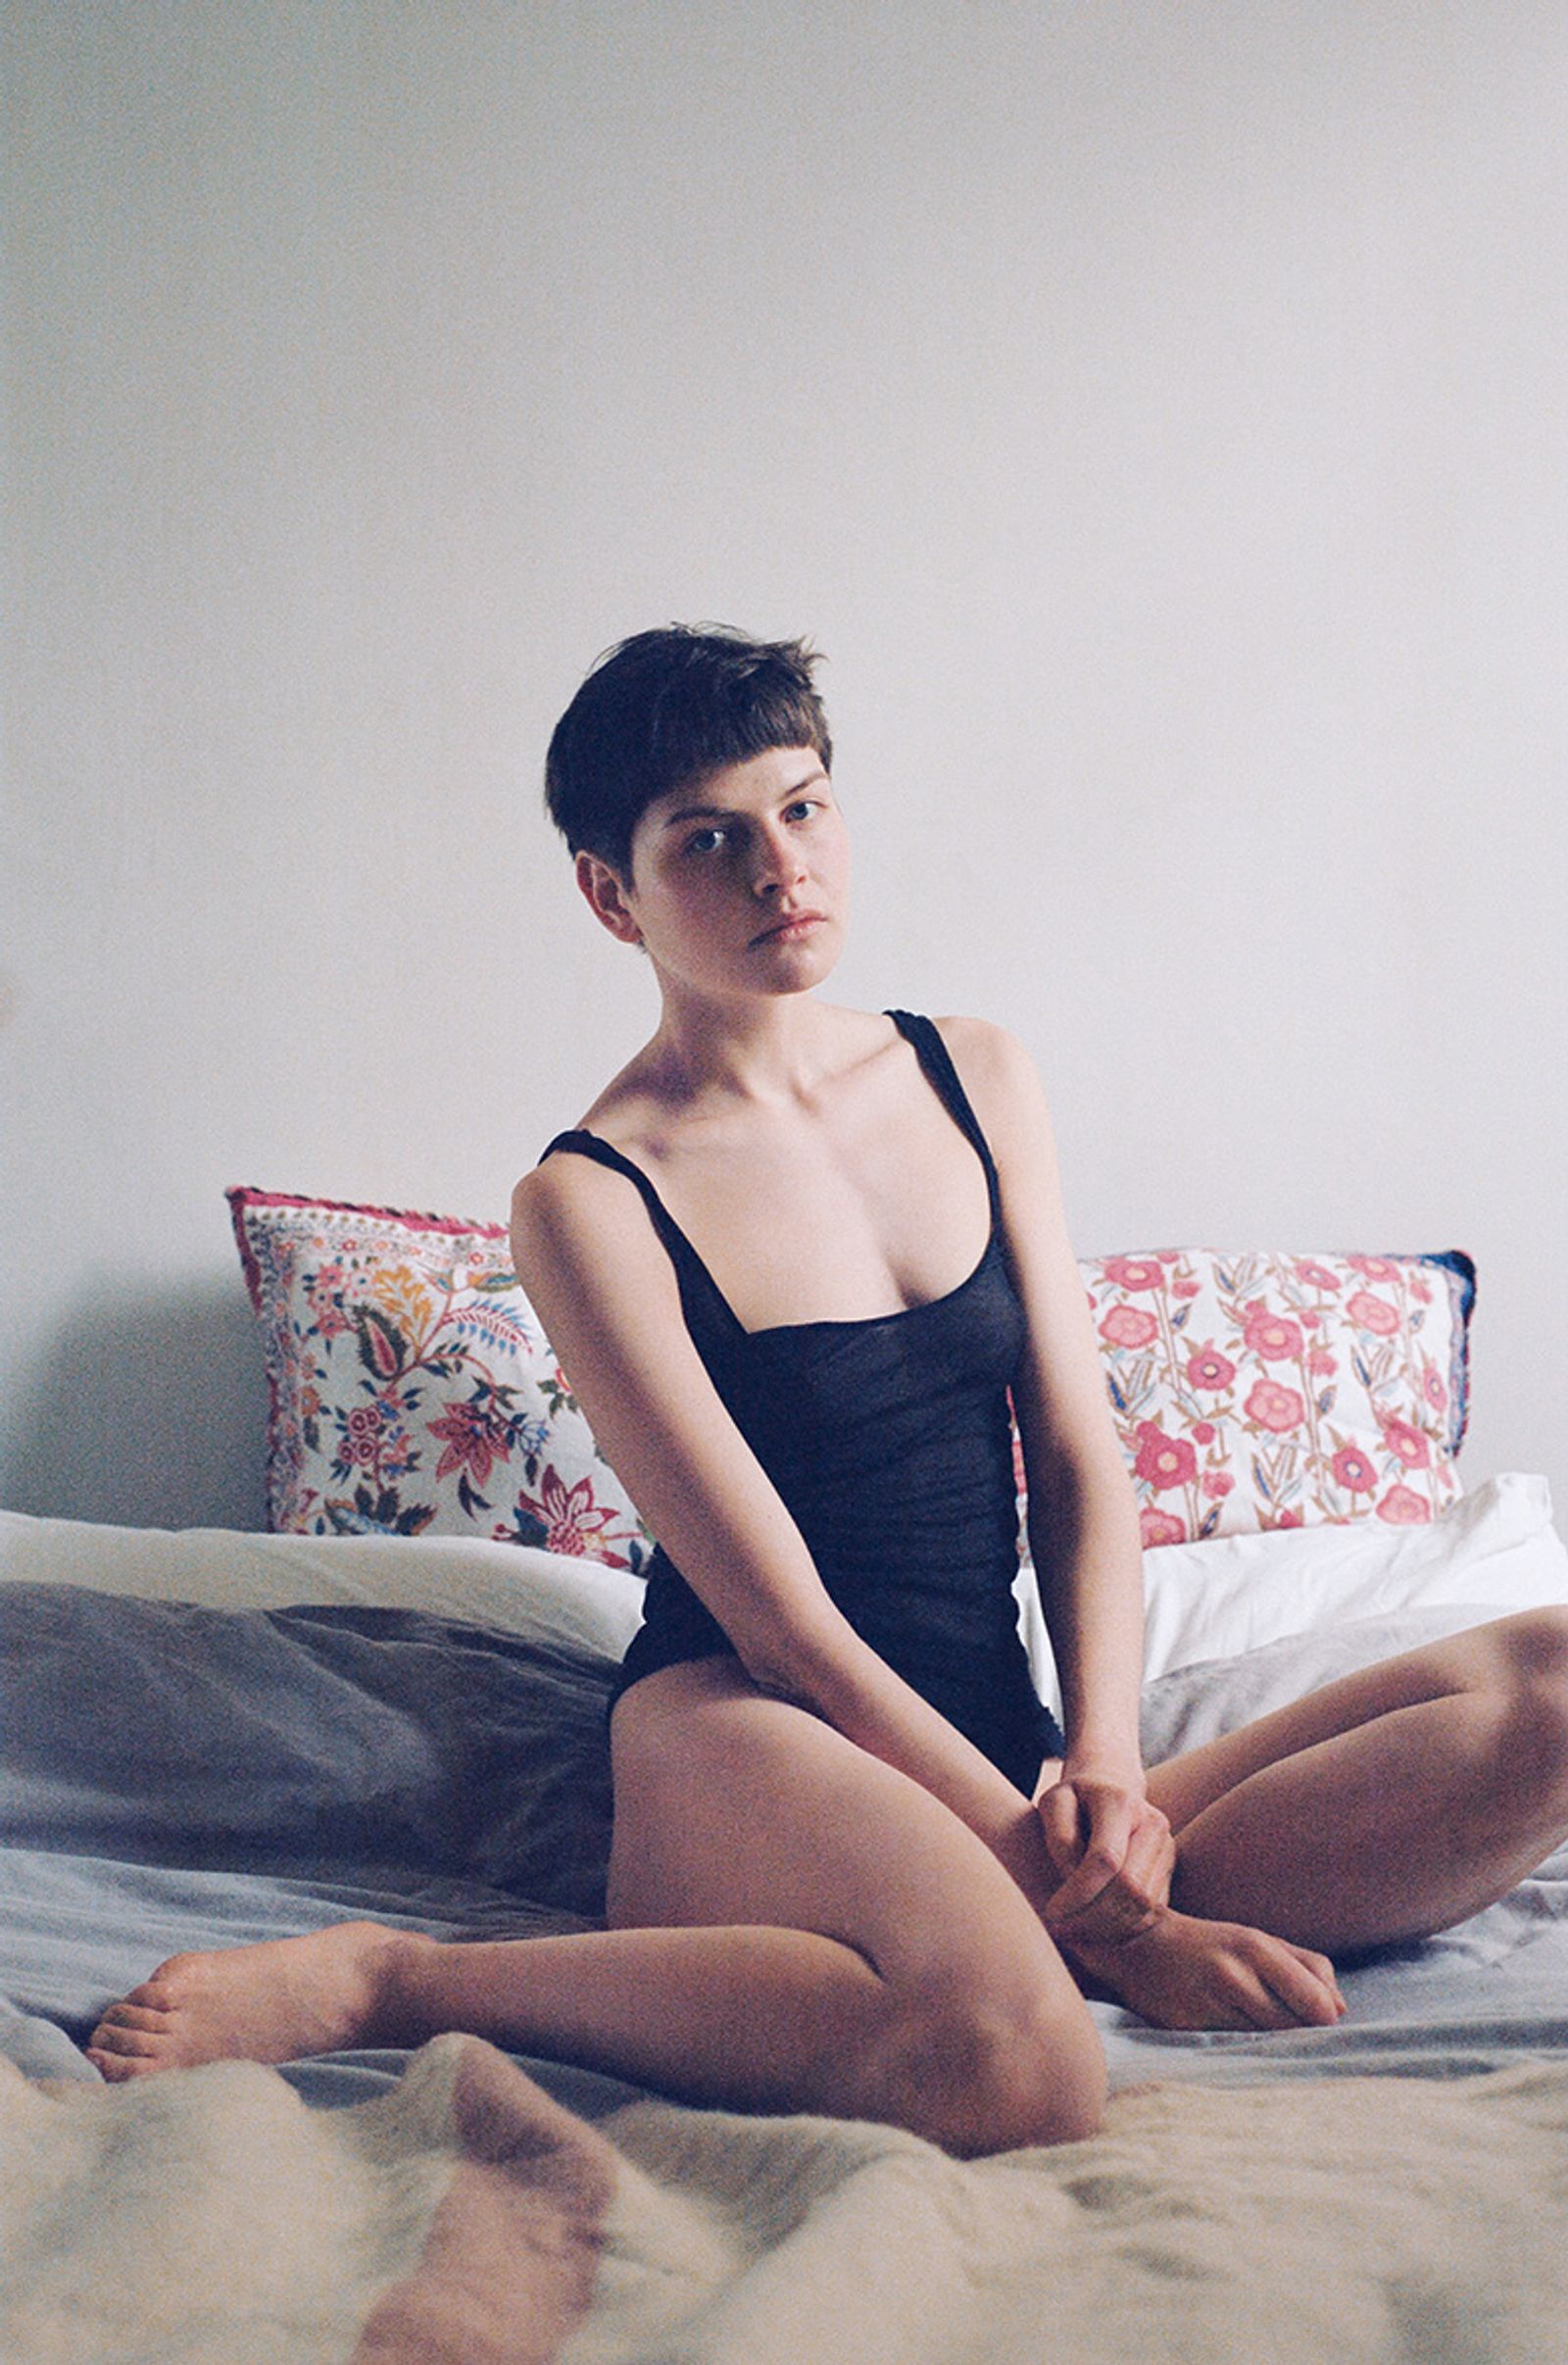 © Chiara Kurtovic - Image from the In My Bed photography project